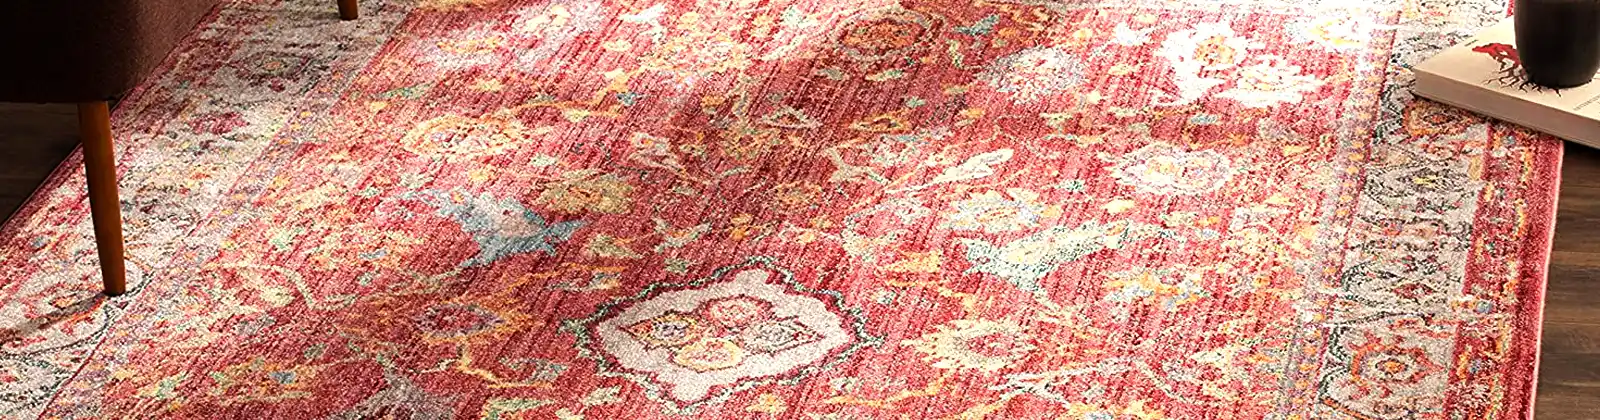 Oriental Rug Cleaning Services Pompano Beach